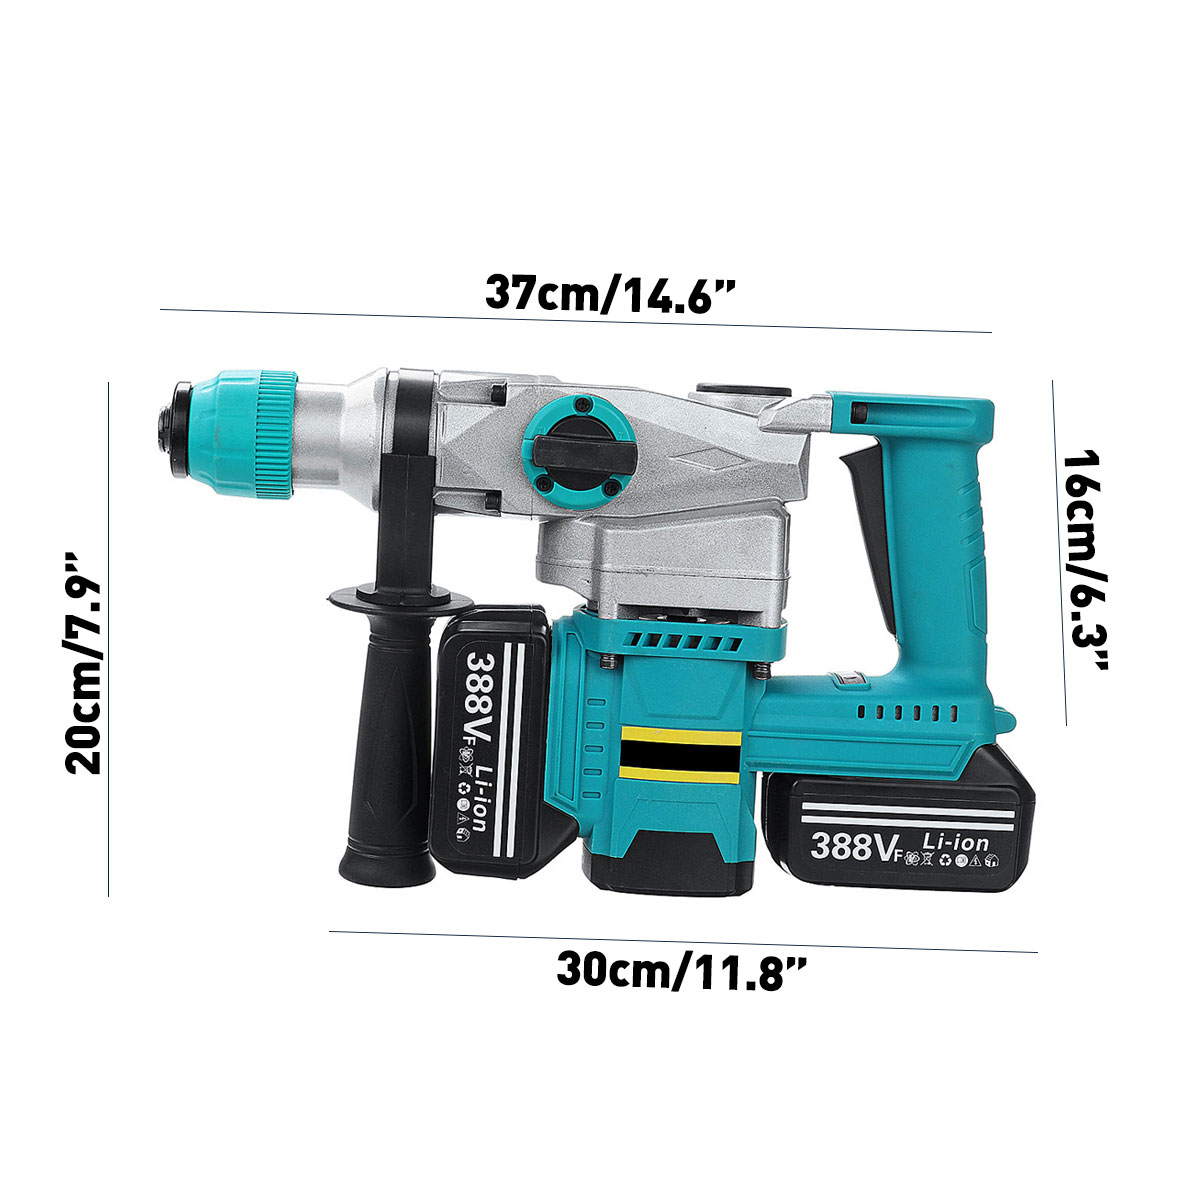 2000W-Brushless-Electric-Hammer-Heavy-Duty-Rechargeable-Impact-Drill-Multifunction-Hammer-W-2pcs-Bat-1879569-5